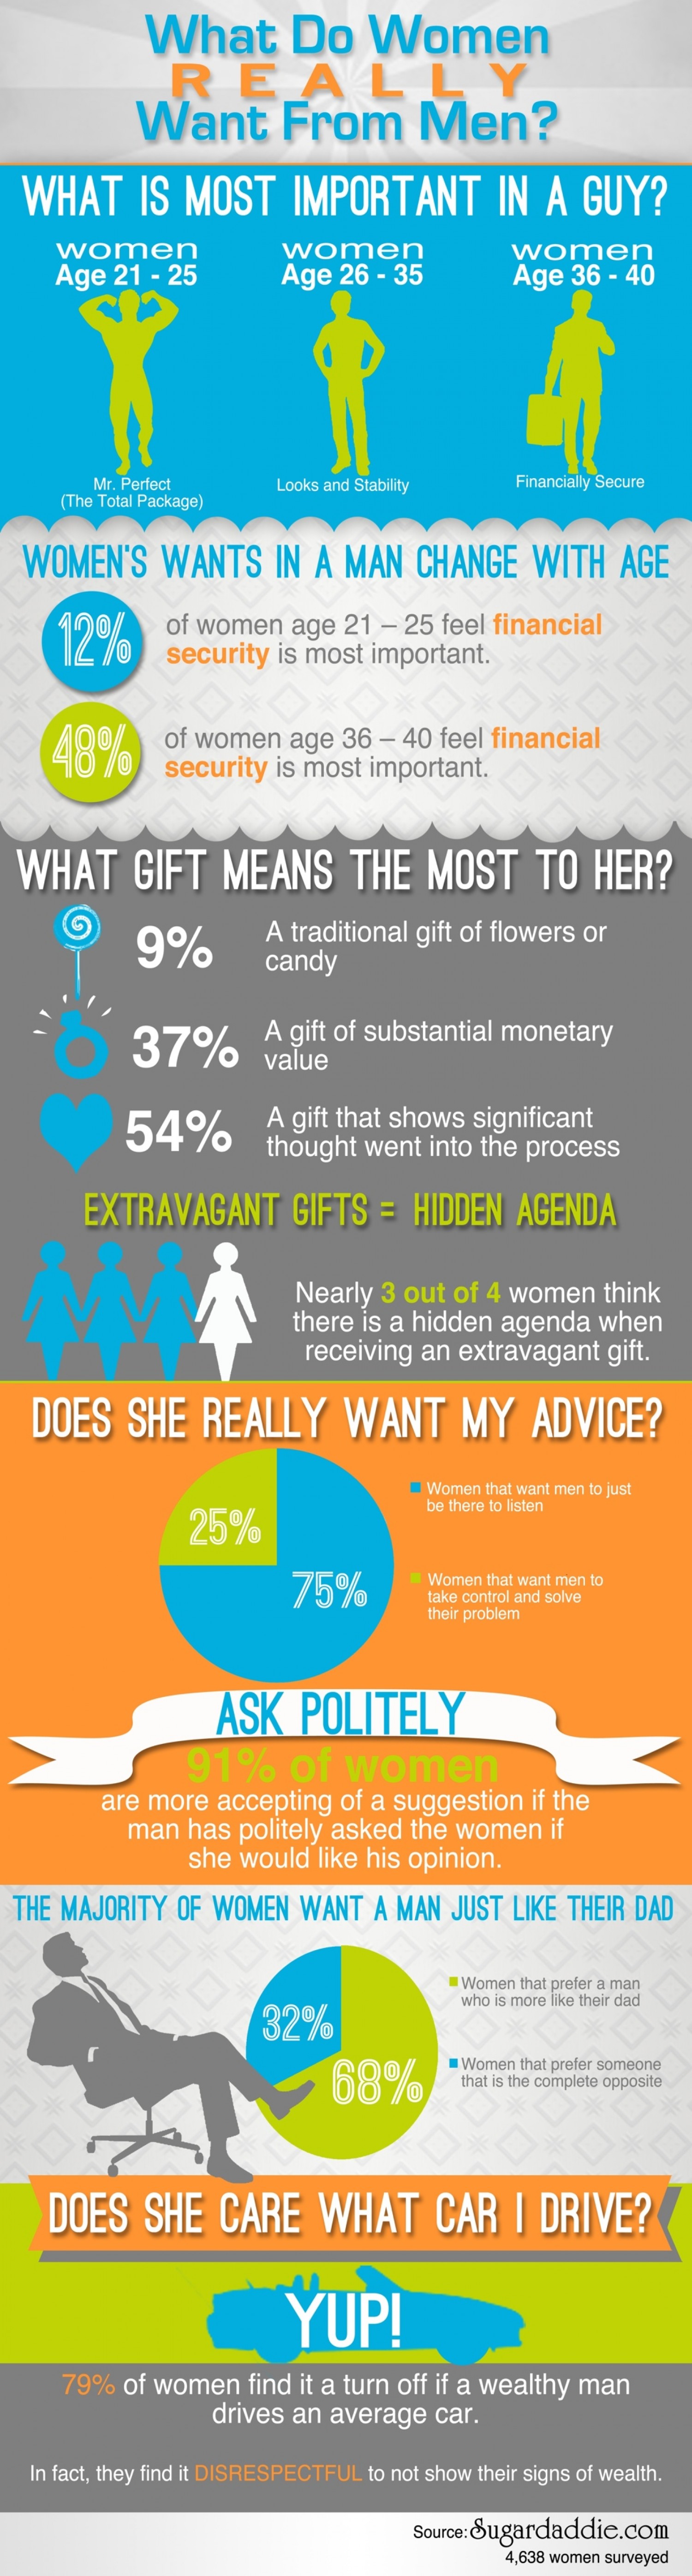 What Do Women Really Want From Men?